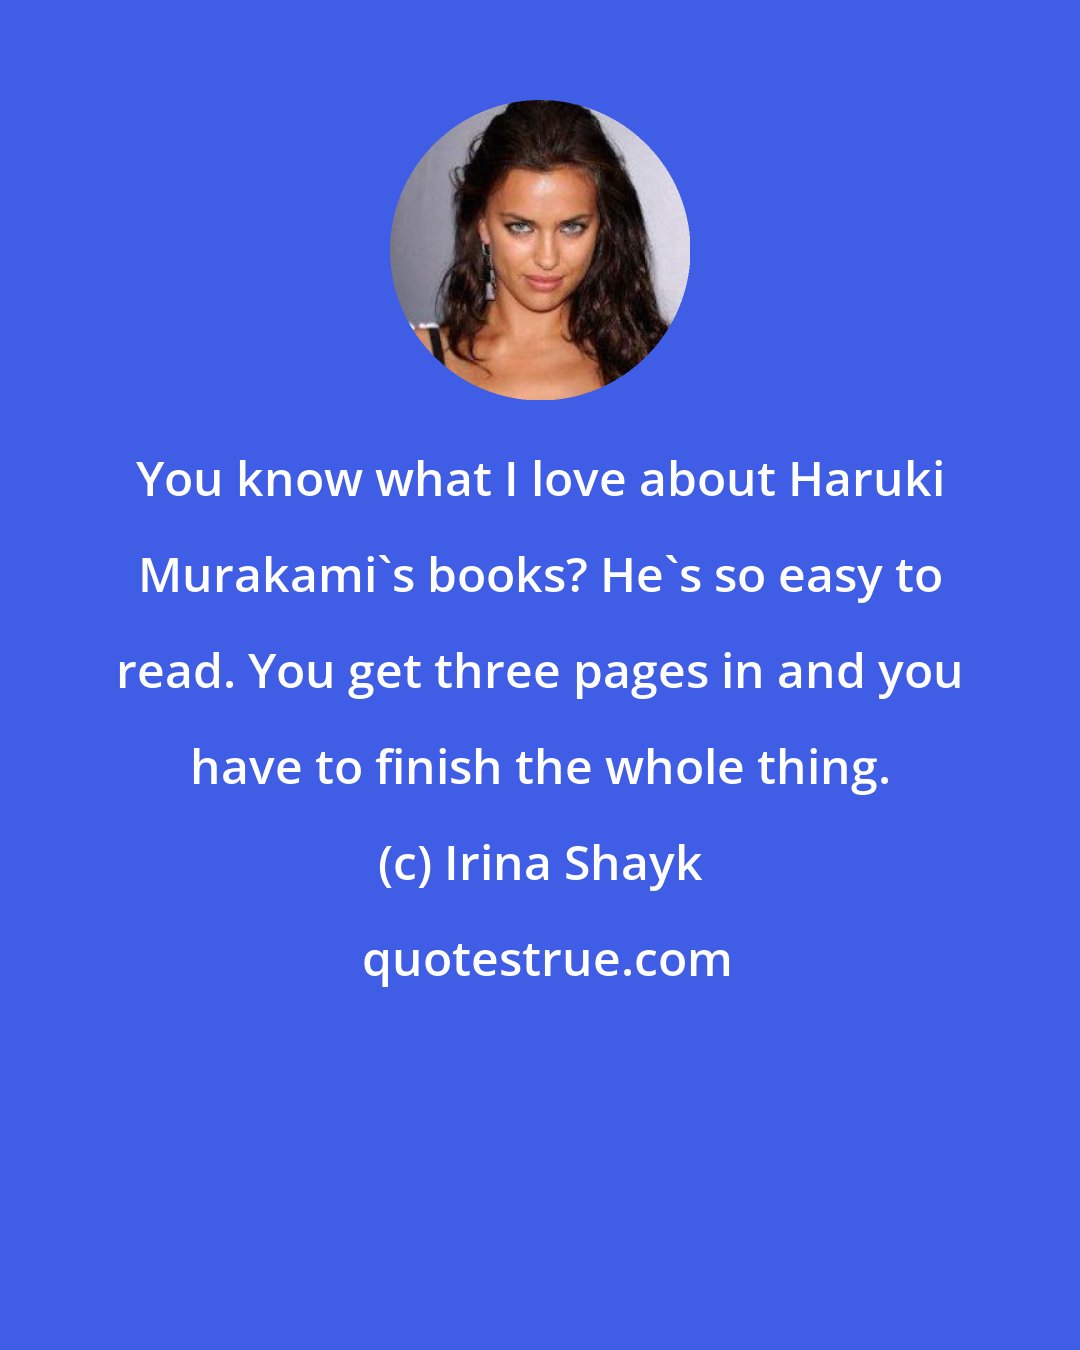 Irina Shayk: You know what I love about Haruki Murakami's books? He's so easy to read. You get three pages in and you have to finish the whole thing.